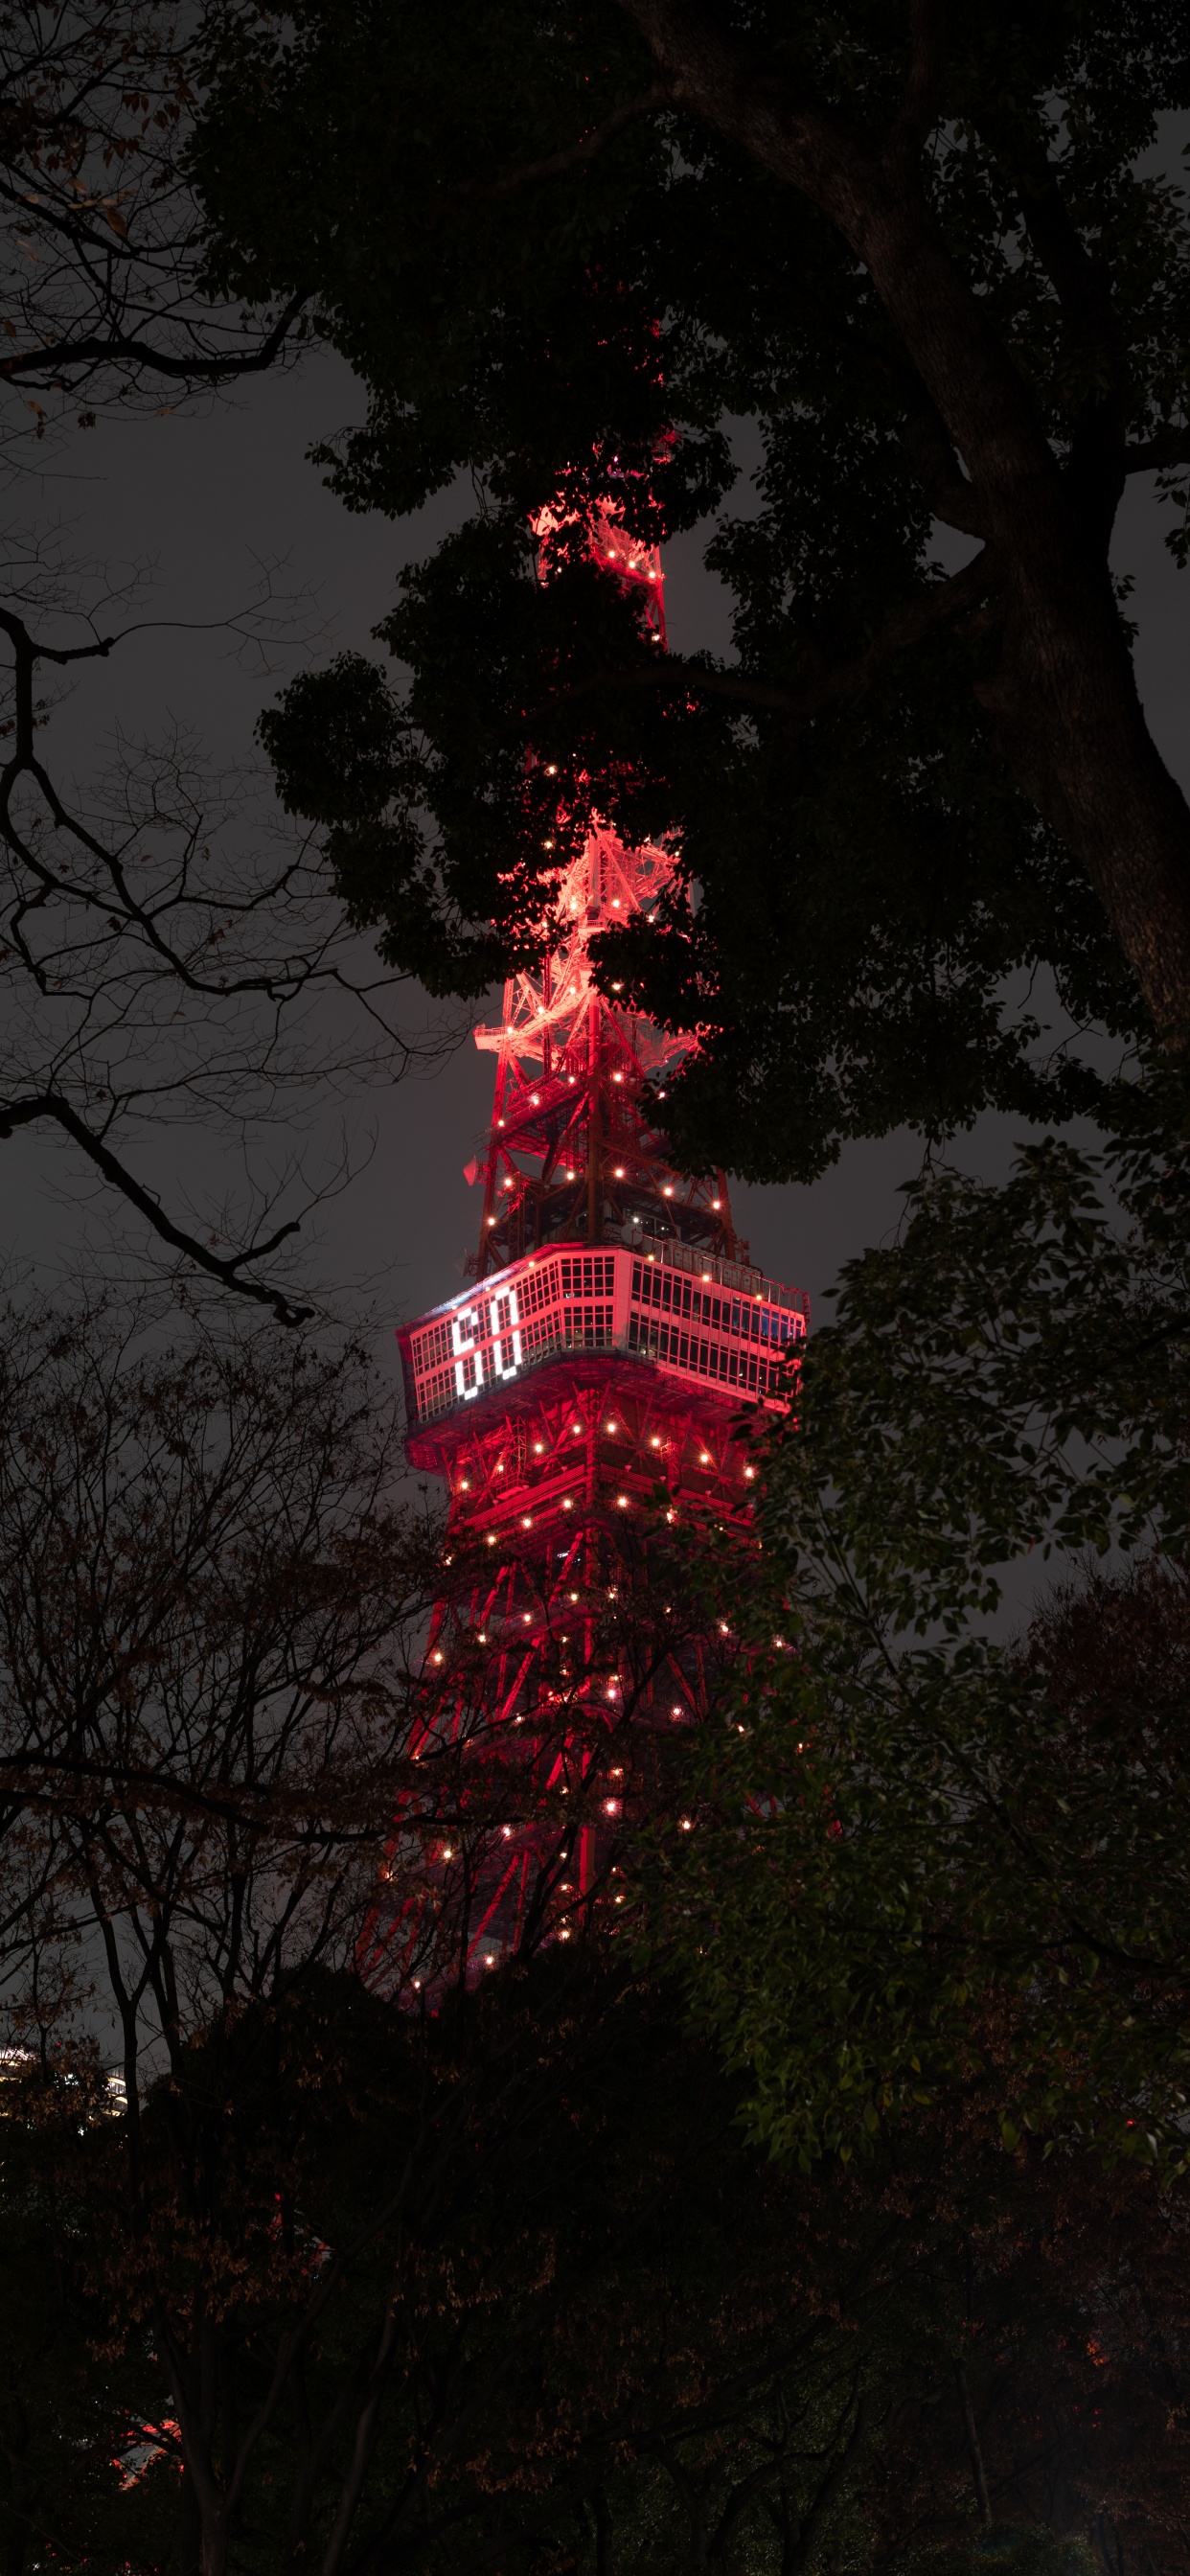 Red and White Tower Near Trees During Night Time. Wallpaper in 1242x2688 Resolution